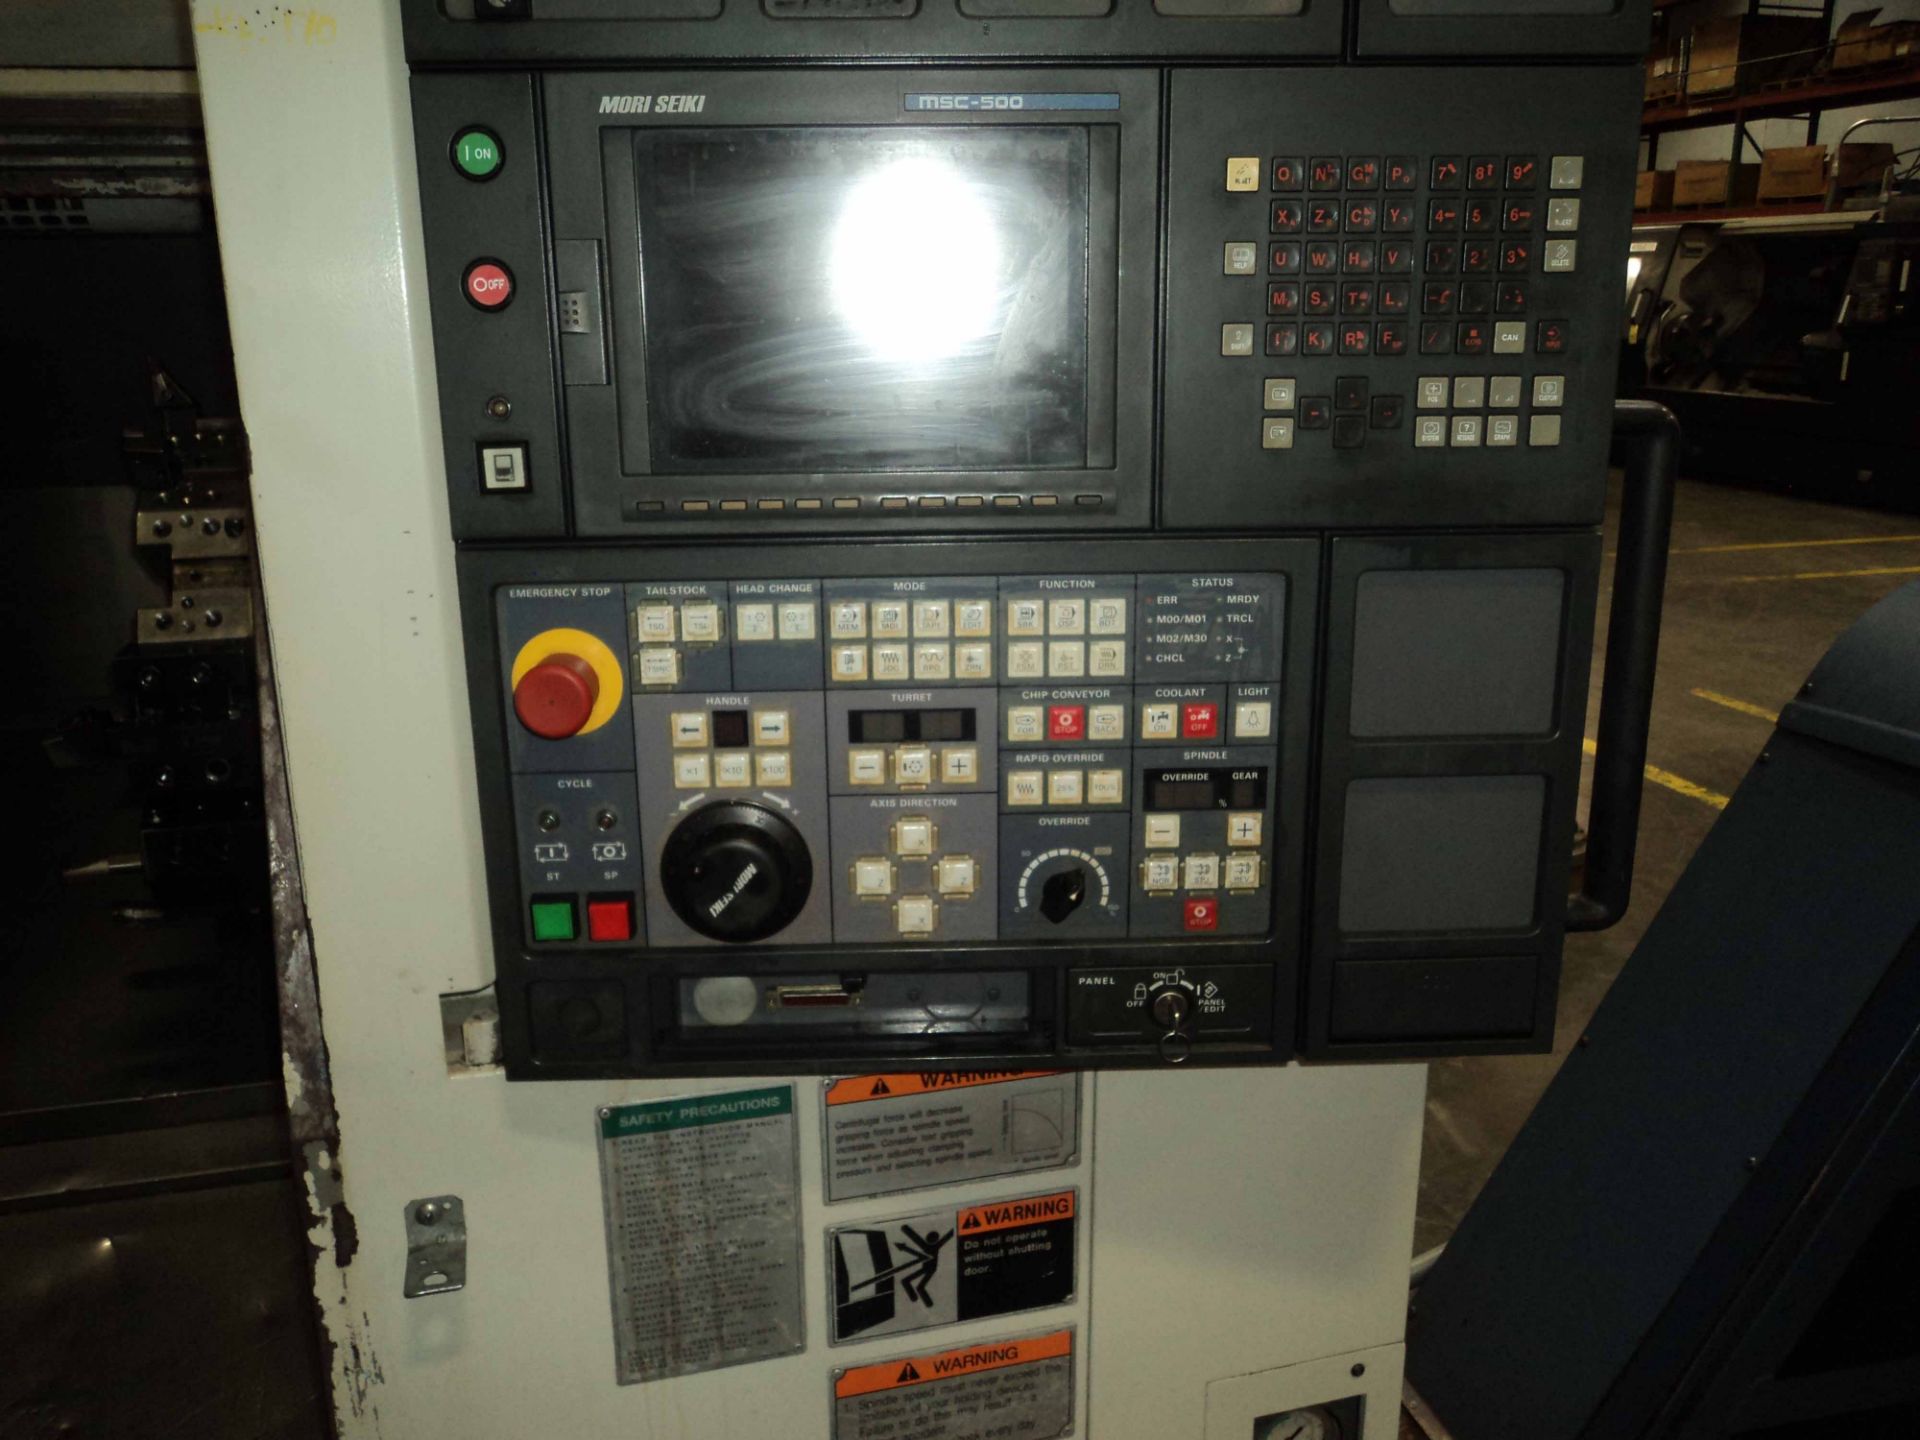 CNC LATHE, MORI SEIKI MDL. SL-200, MSC-500 CNC control, 25.8" sw. over bed, 20.1" sw. over - Image 5 of 5